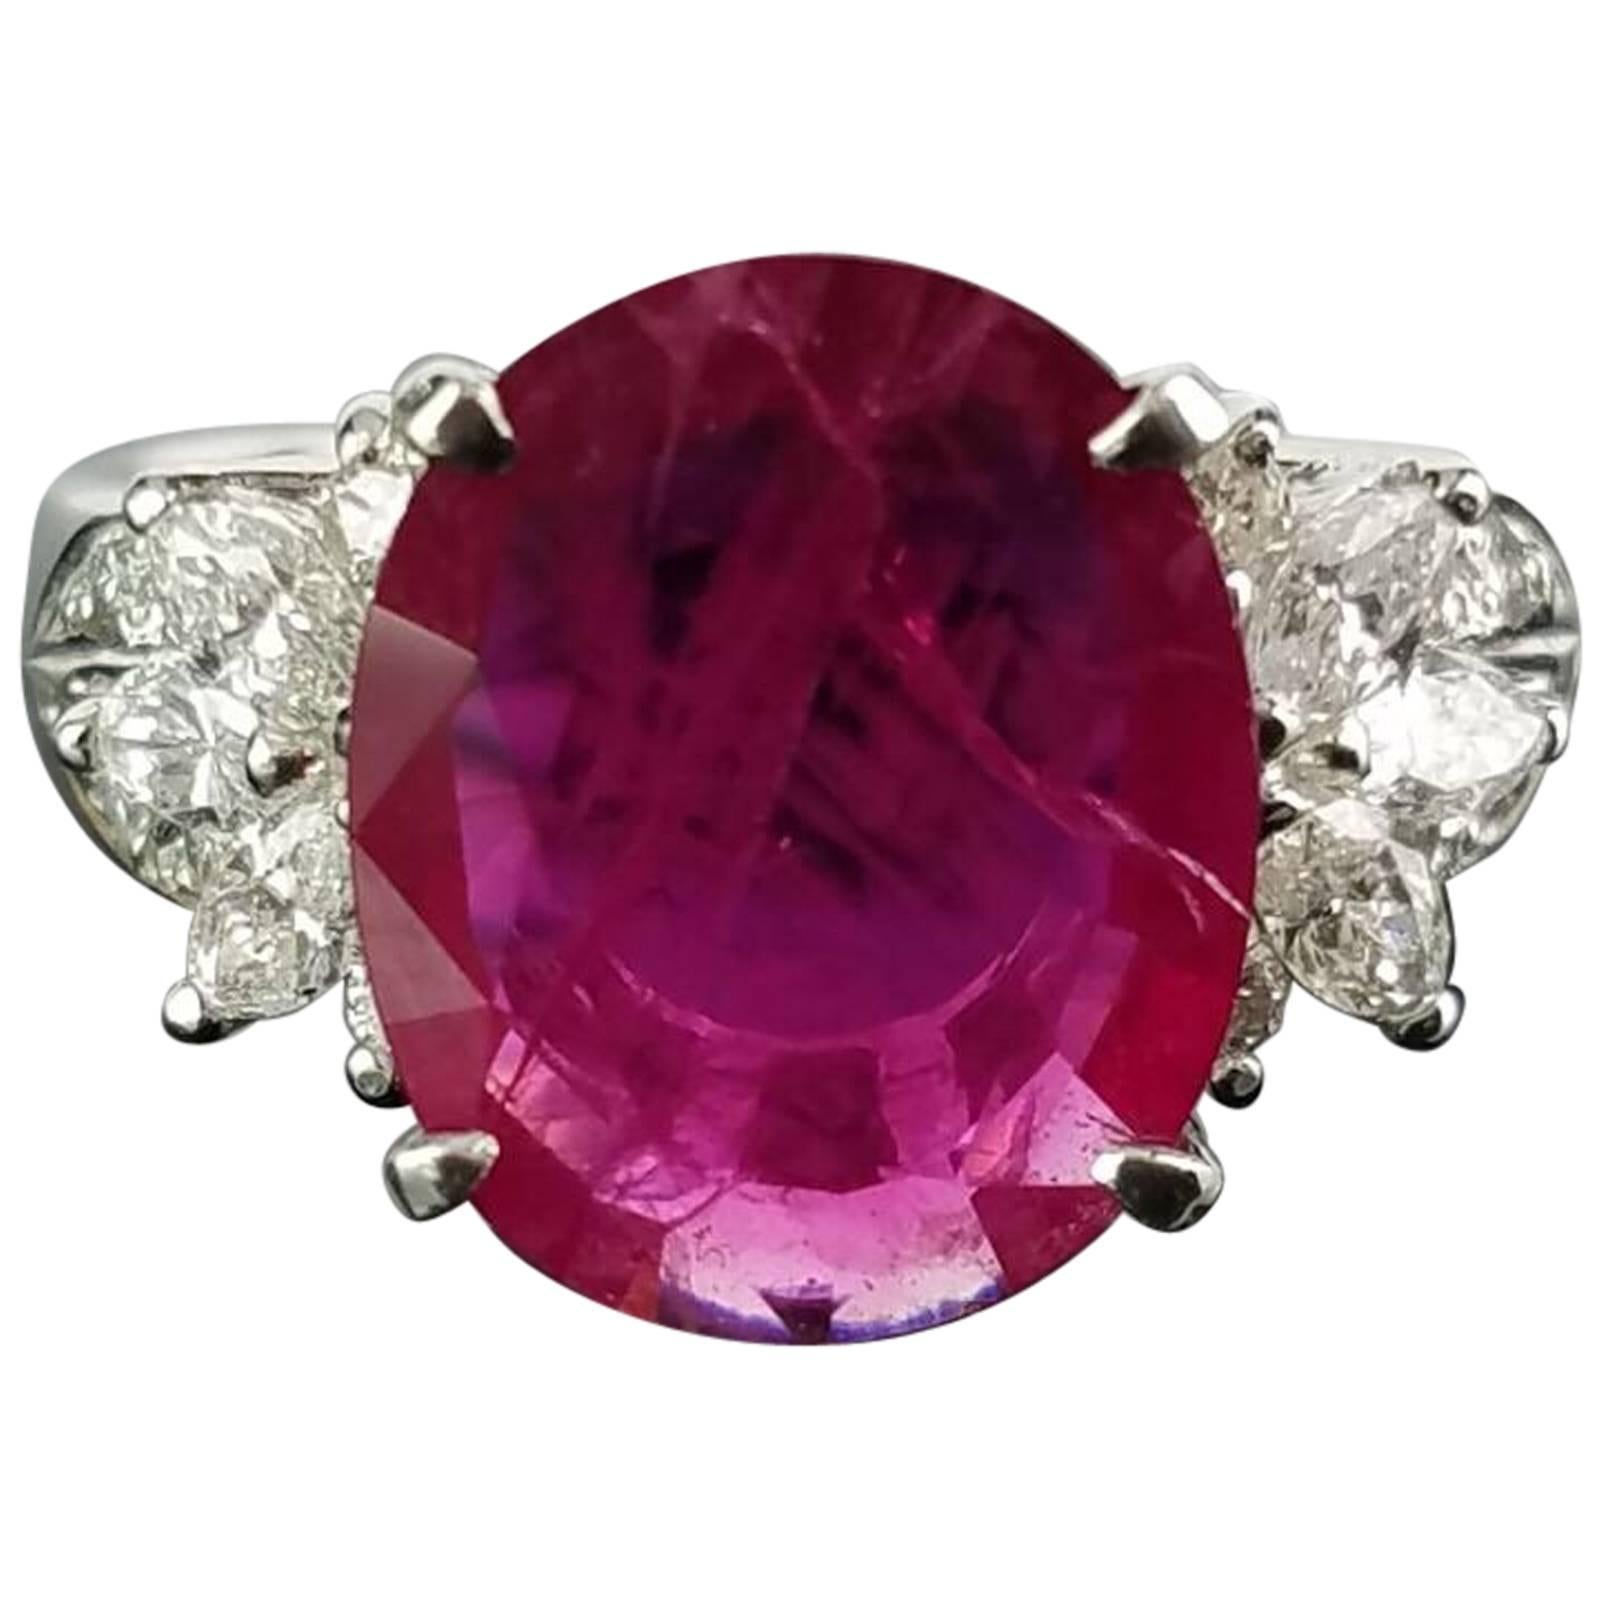 3.12 Carat Burma Ruby and Diamond Cocktail Ring with a Platinum Band